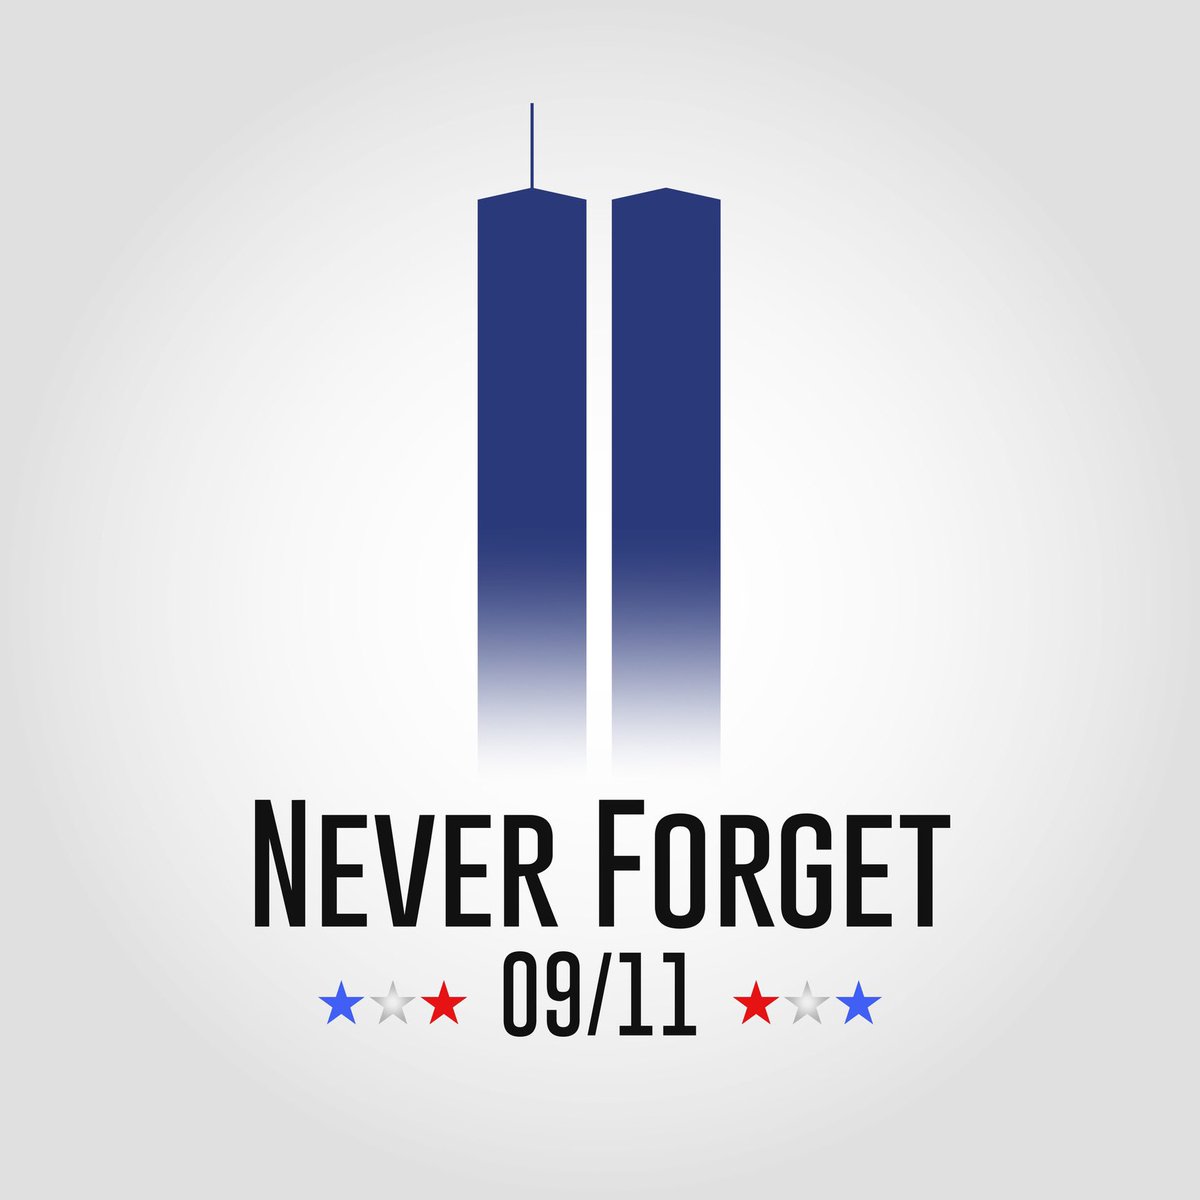 So while today will always be a day of mourning and reflection for Americans, we’re also reminded of the bravery exhibited by those who chose to run toward danger so that others might live. May we never forget.